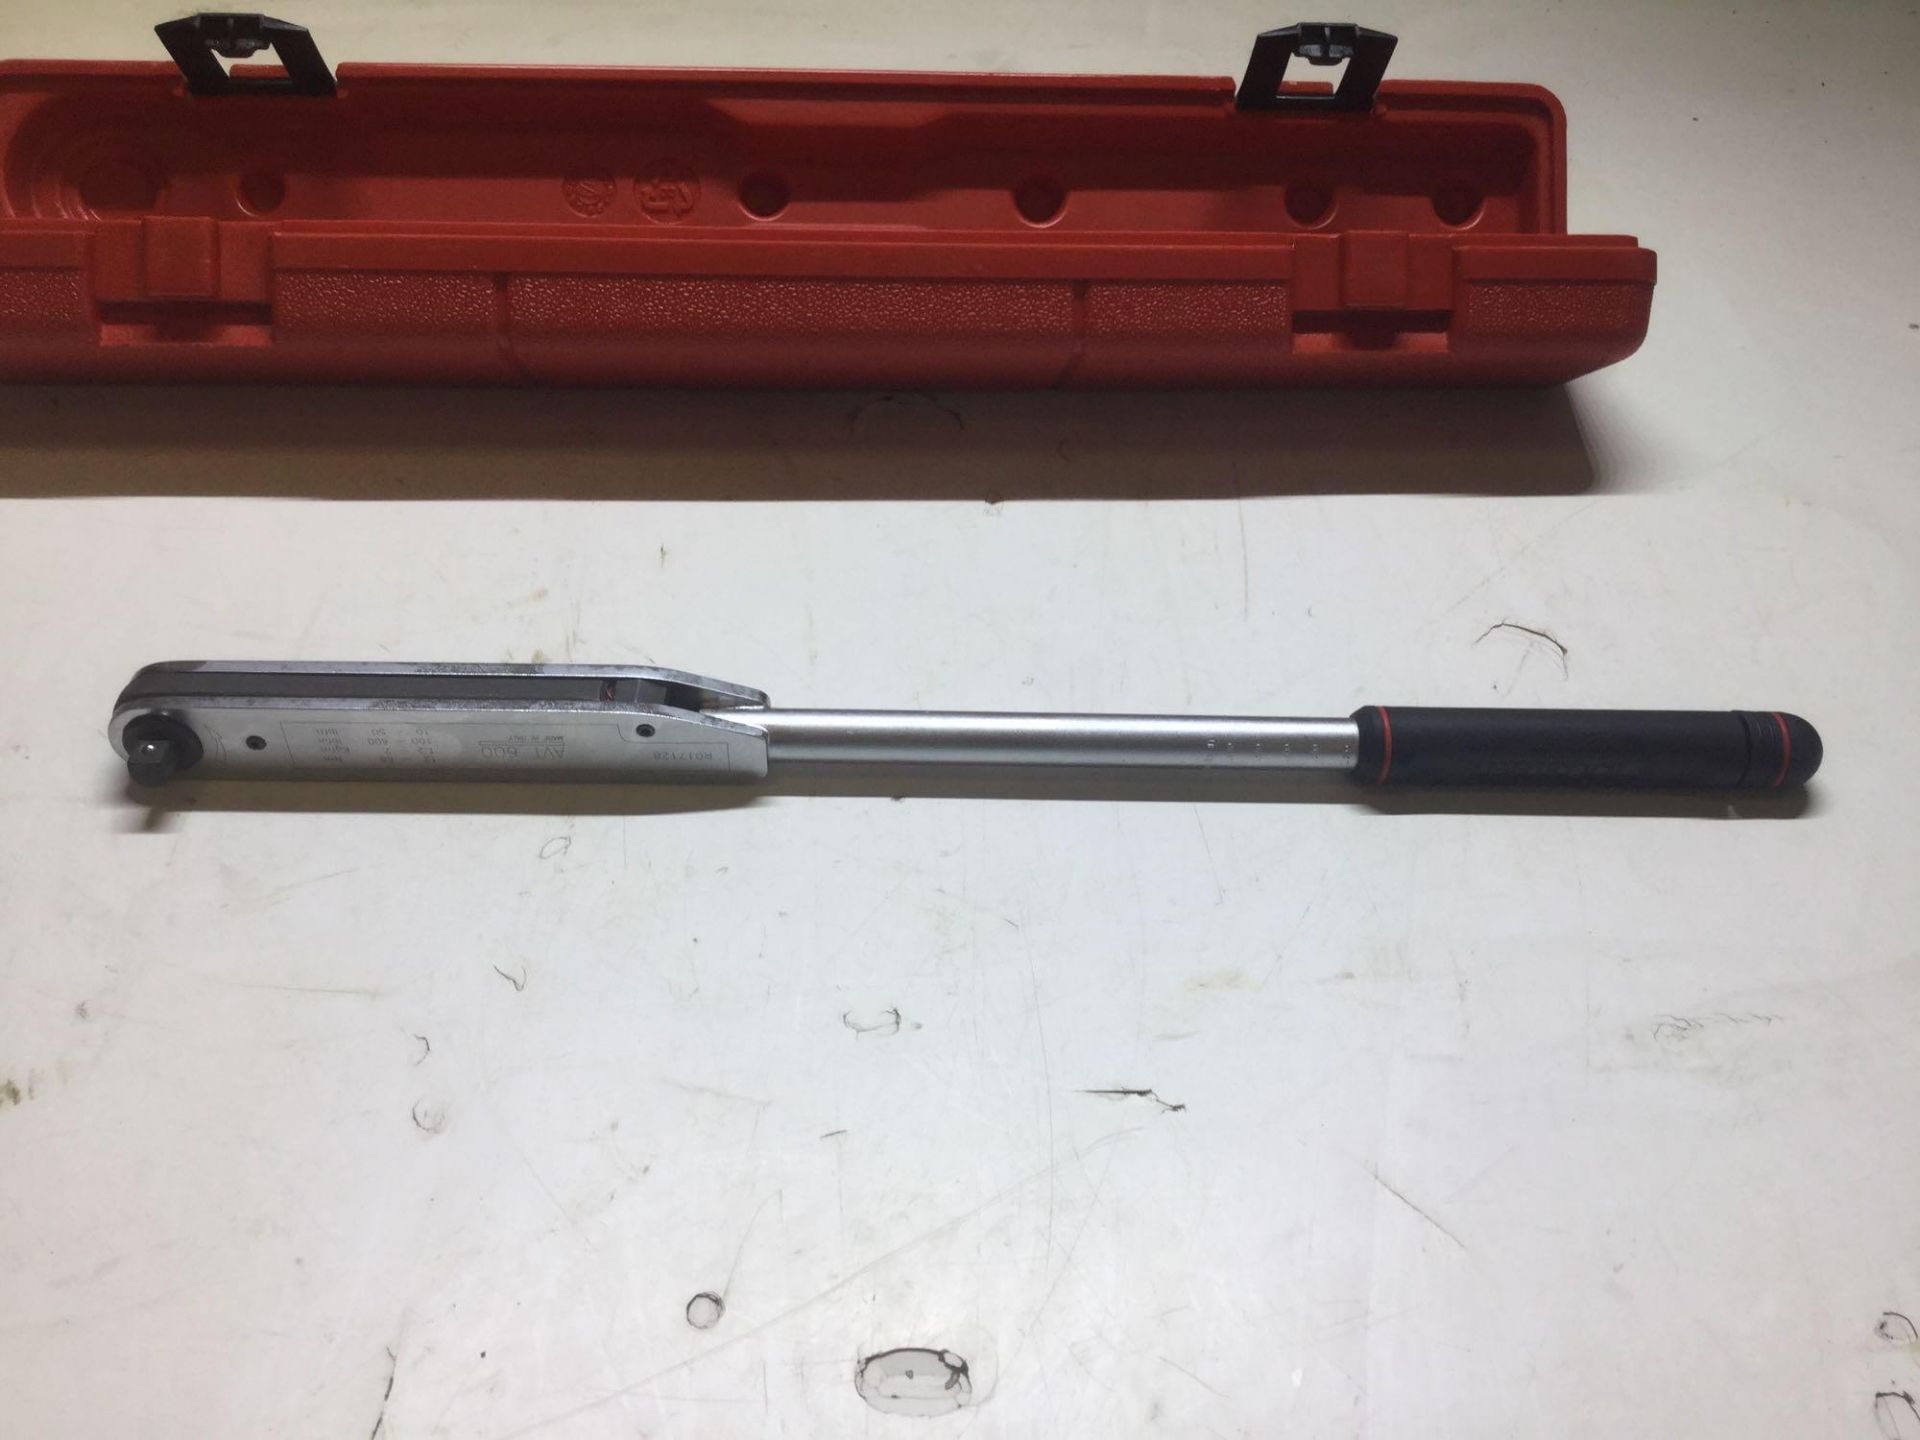 Britool 3/8 Torque Wrench (New In Box) - Image 2 of 4